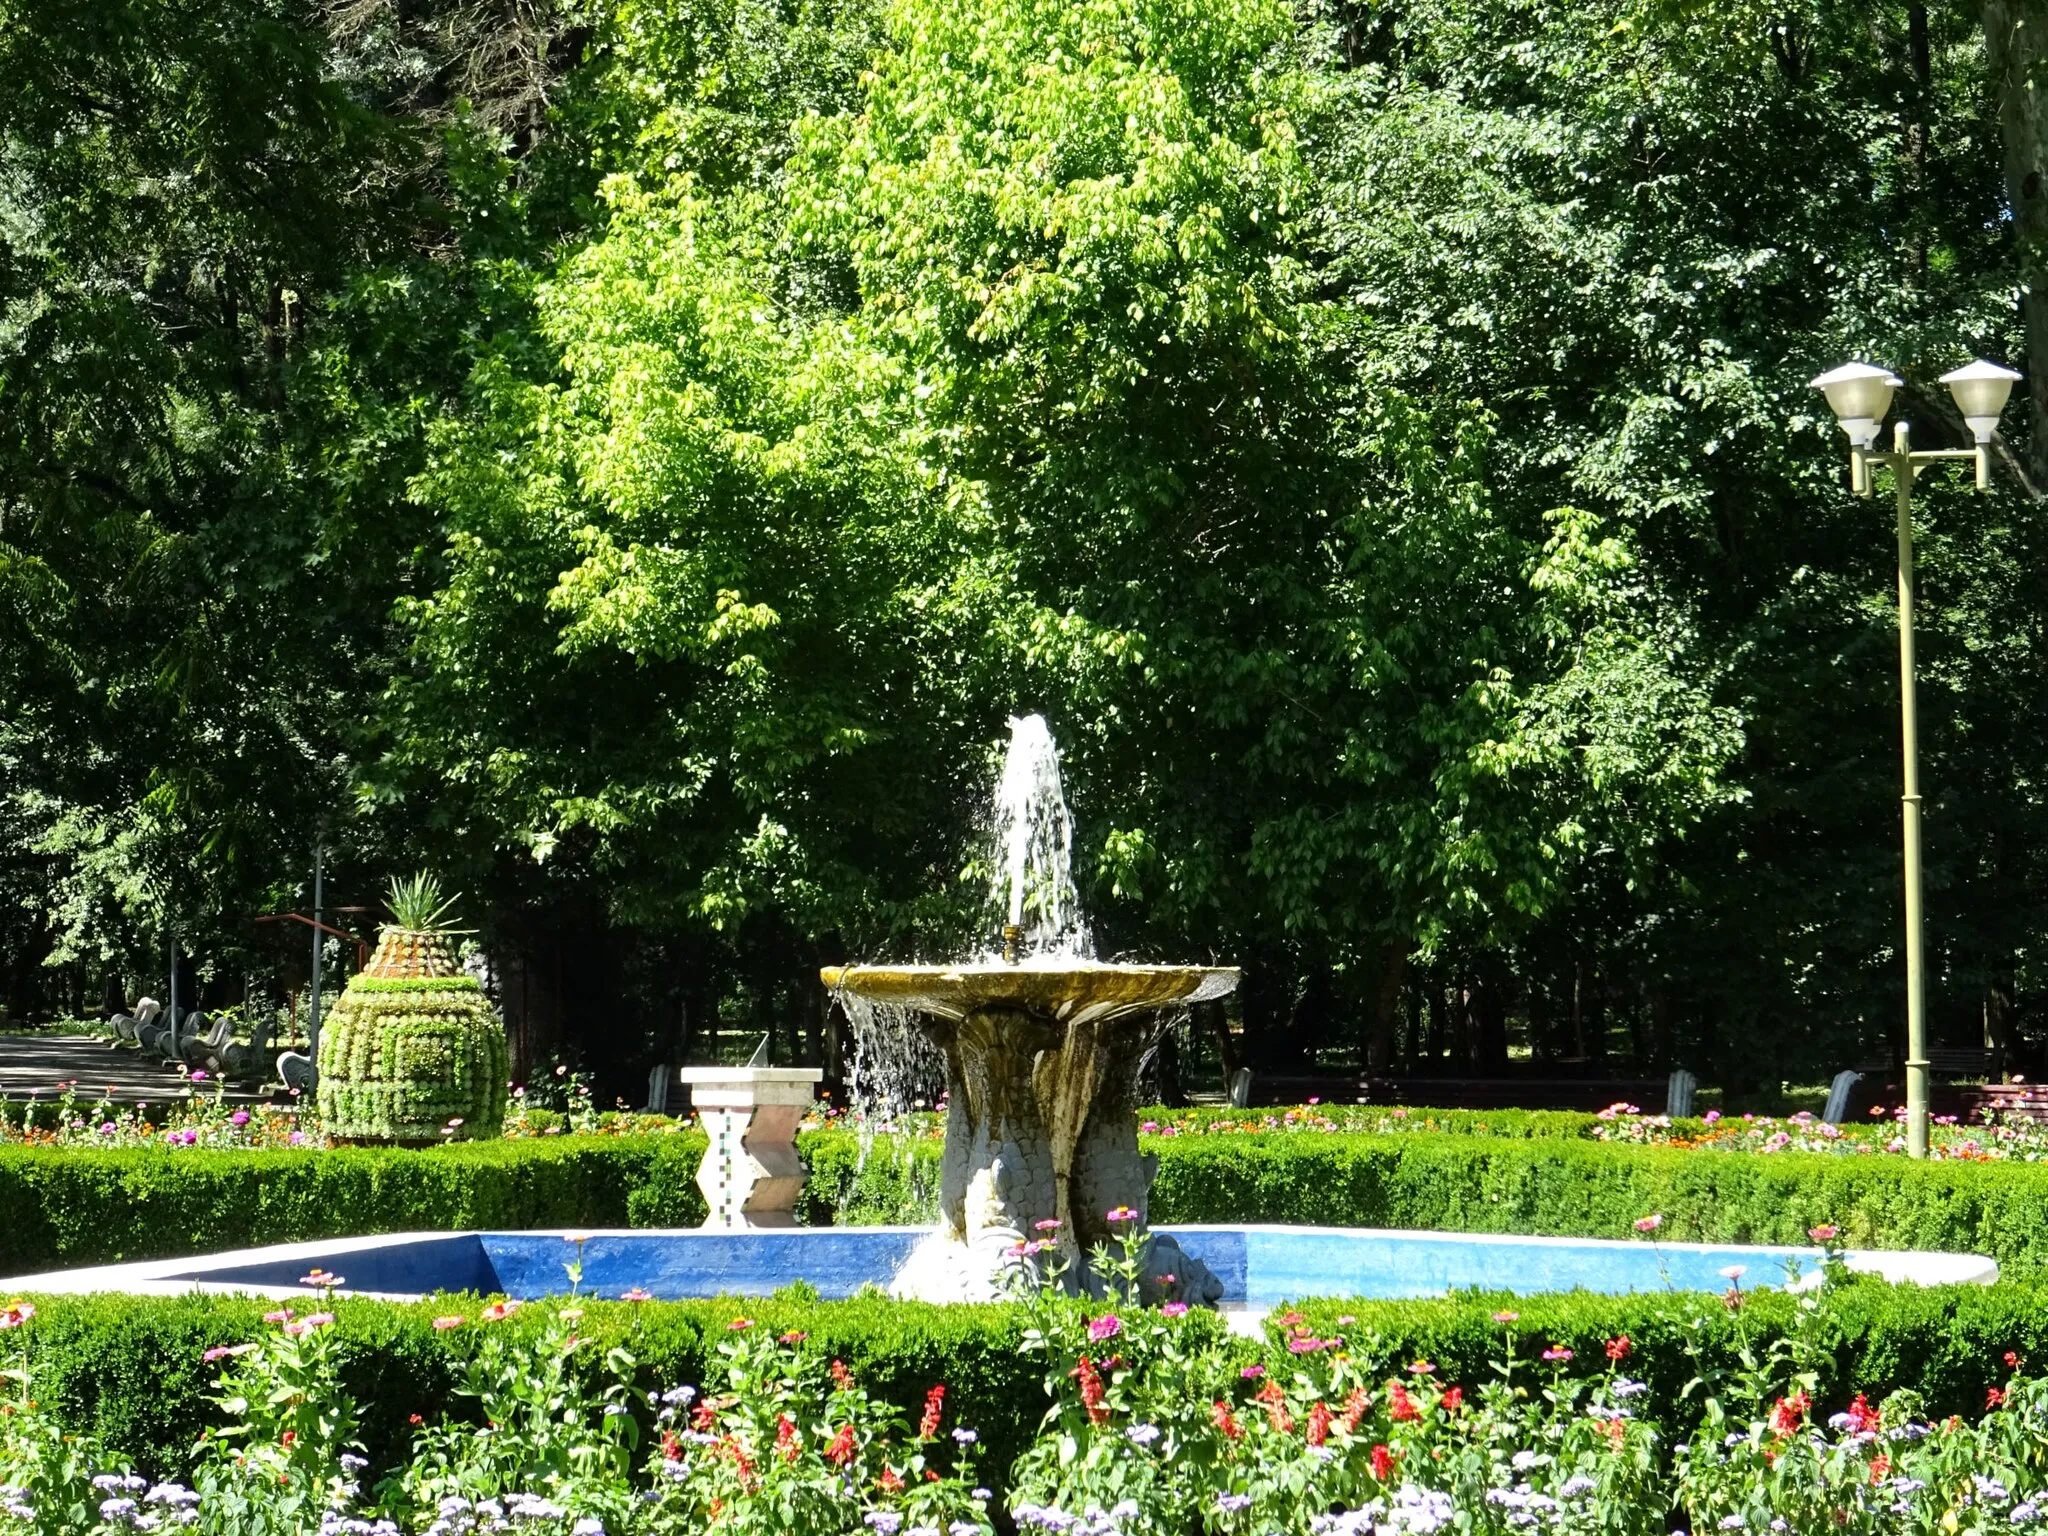 Photo showing: Fountain and plants in Buzias central park

This is a photo of a historic monument in județul Timiș, classified with number TM-II-a-A-06191.